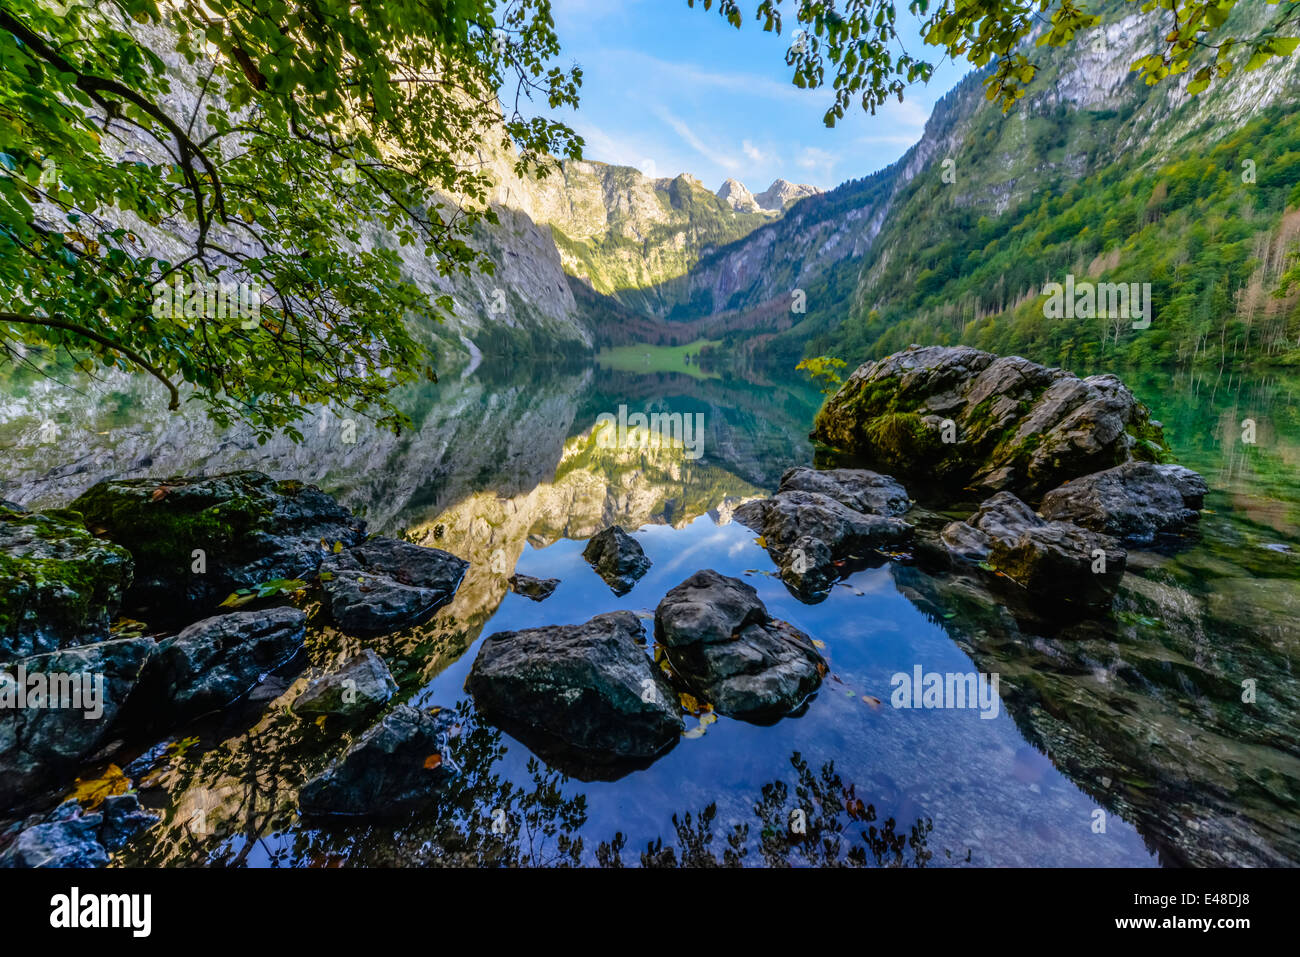 The beautiful Obersee (upper lake) nearby the popular Bavarian Konigssee (king's lake) in Germany Stock Photo